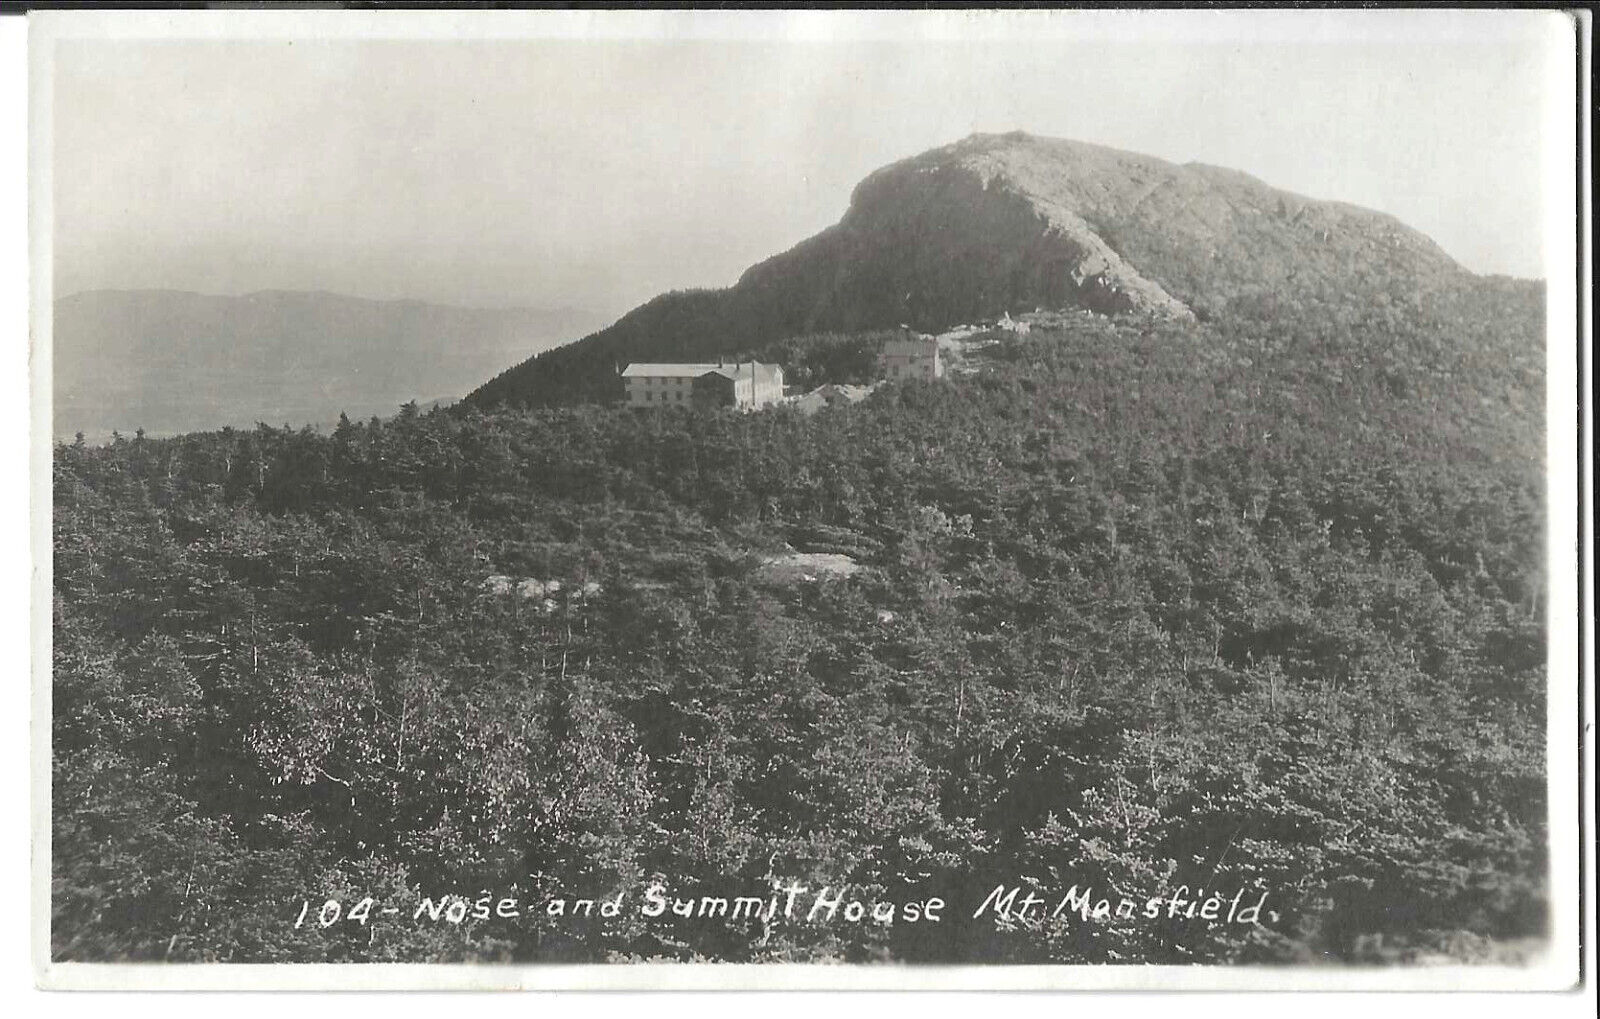 NOSE AND SUMMIT HOUSE,  MOUNT MANSFIELD,  STOWE, VERMONT,  REAL PHOTO